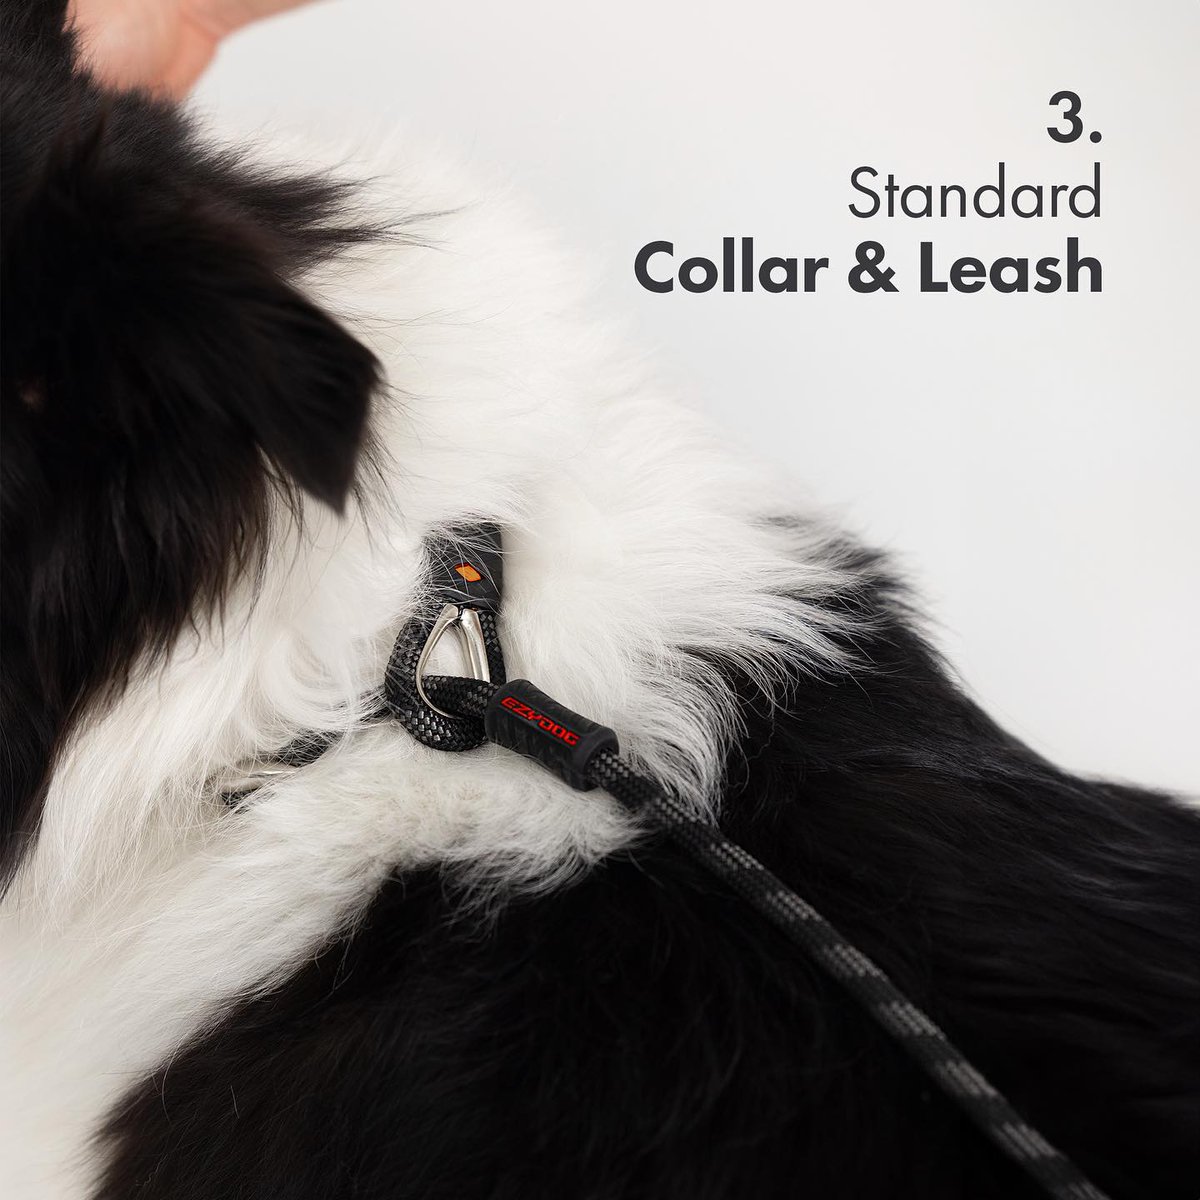 The Luca Leash is a highly effective training accessory for ensuring control and comfort when teaching your dog walking etiquette. #sliplead #slip #ezydog #dog #doglead #lead #ropelead